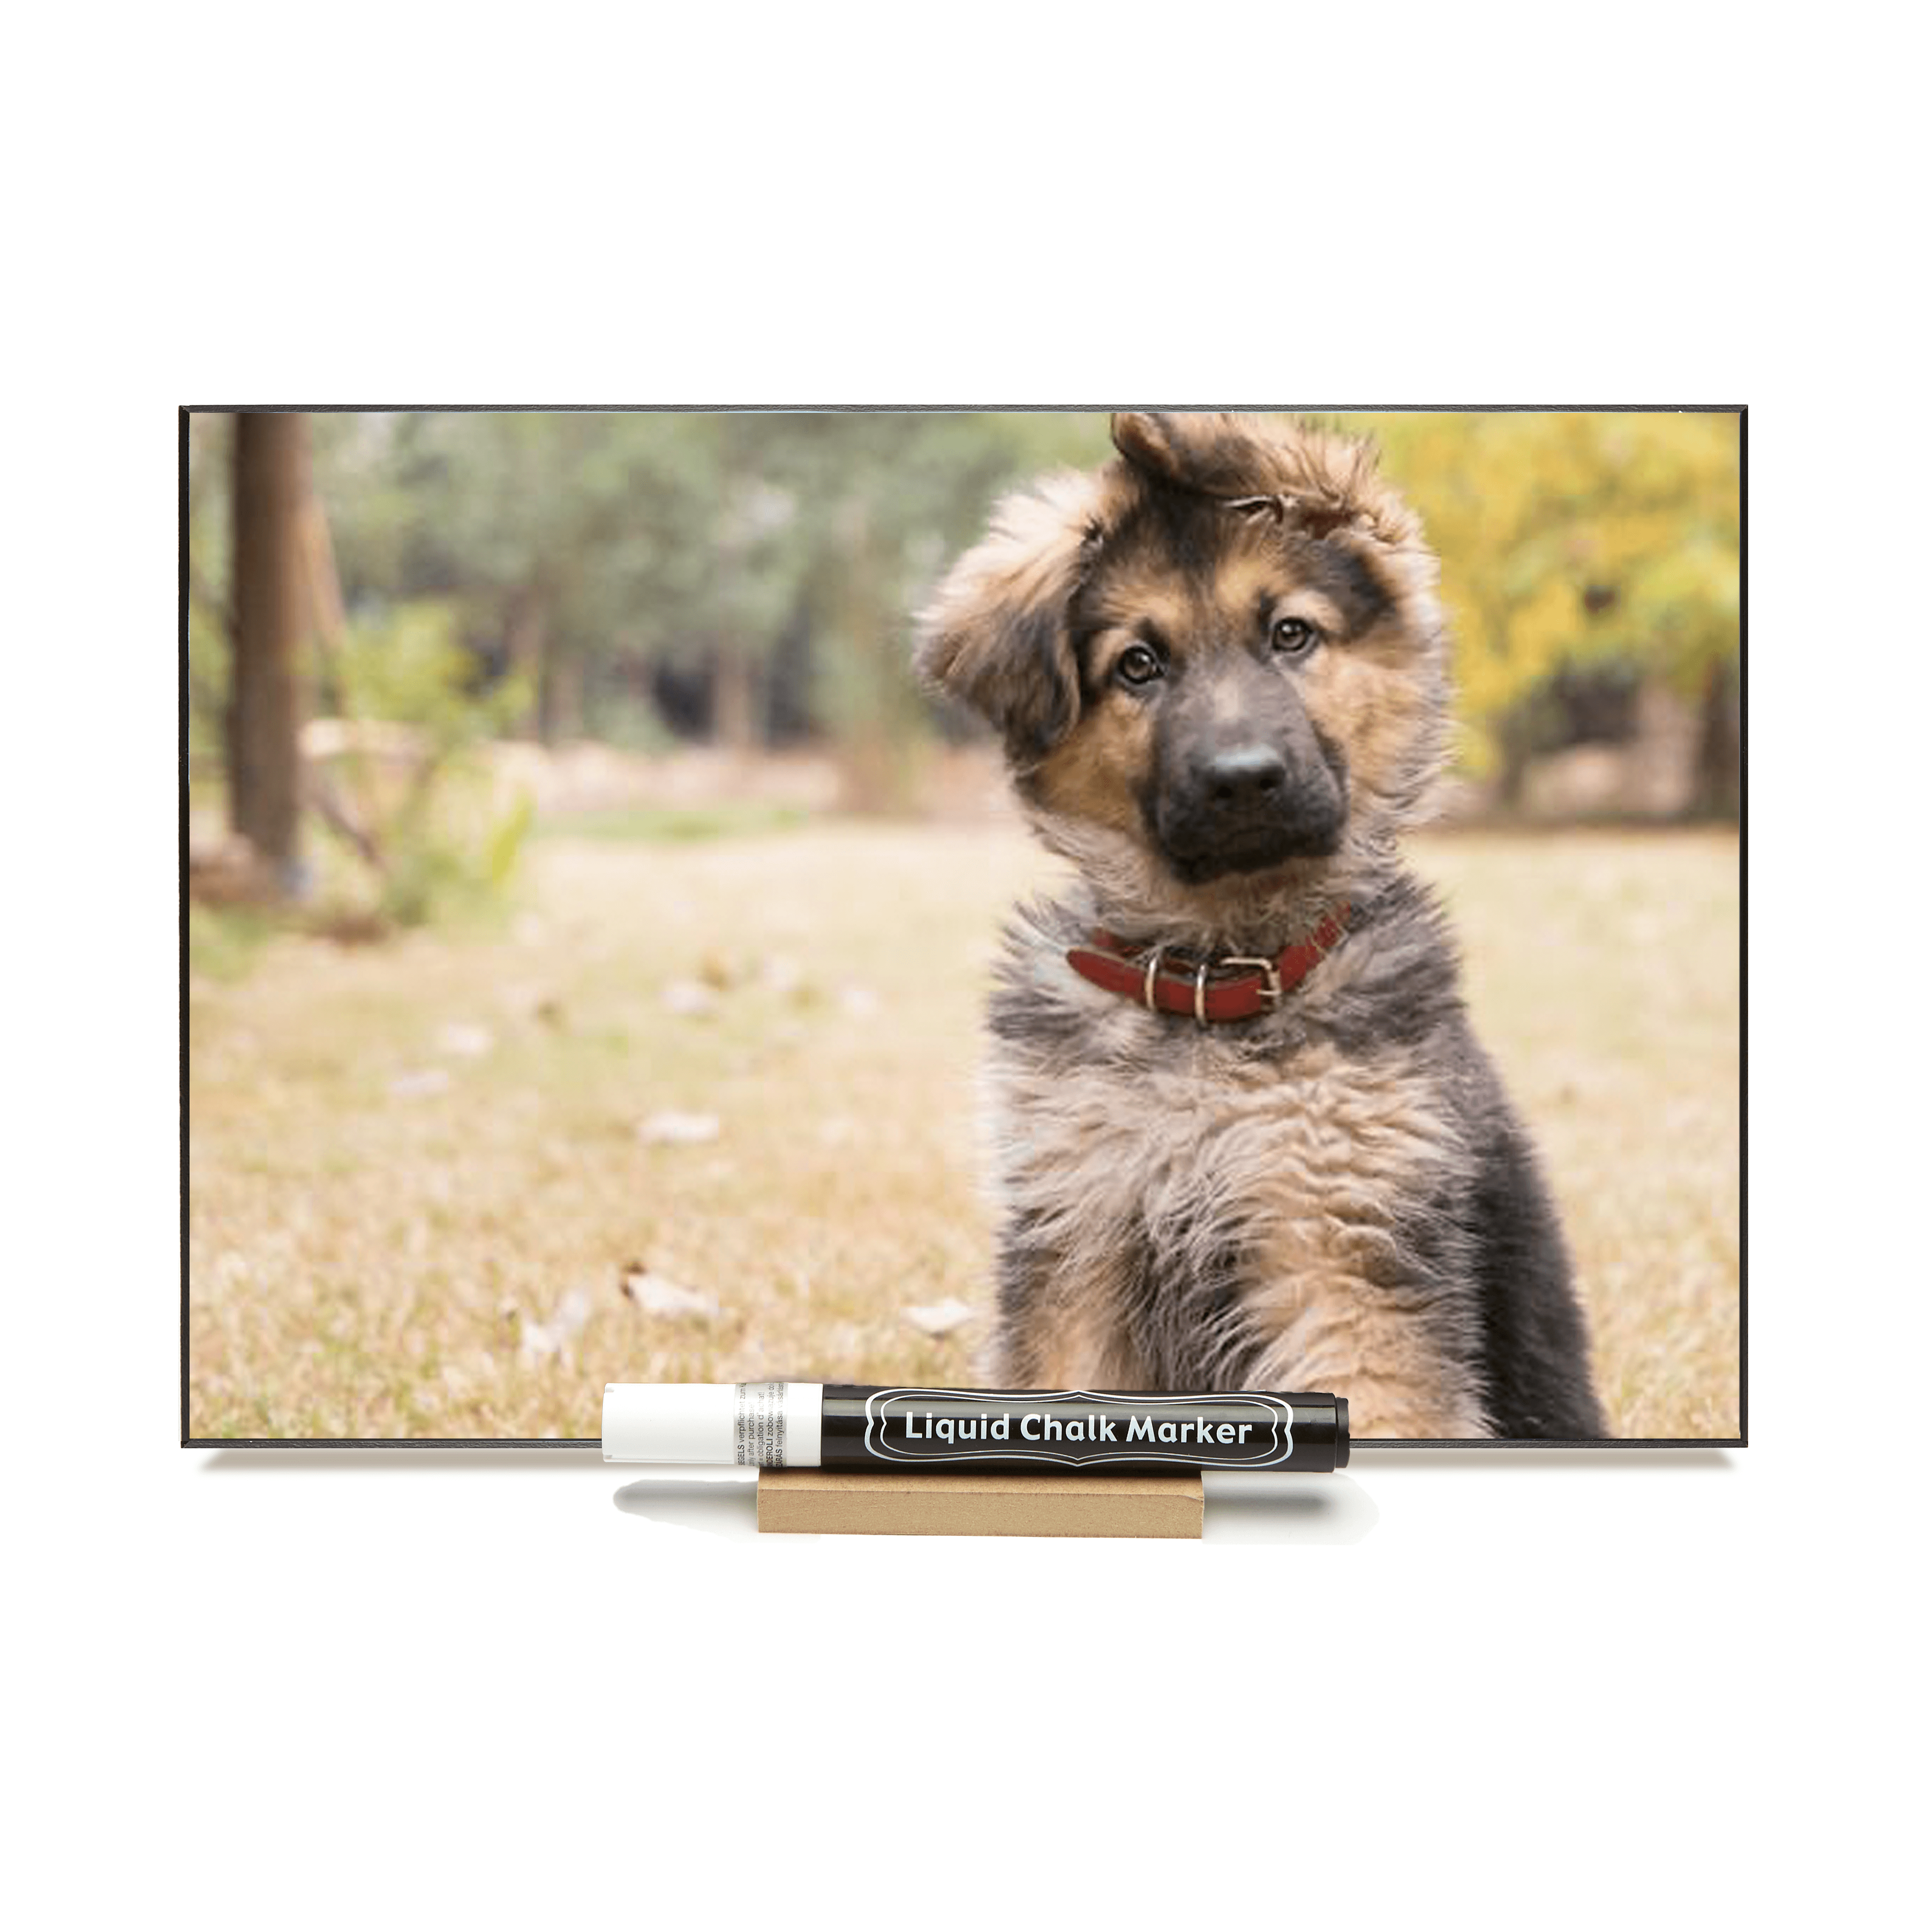 "Shepard Pup"  PHOTO CHALKBOARDS  Includes Chalkboard, Chalk Marker and Stand